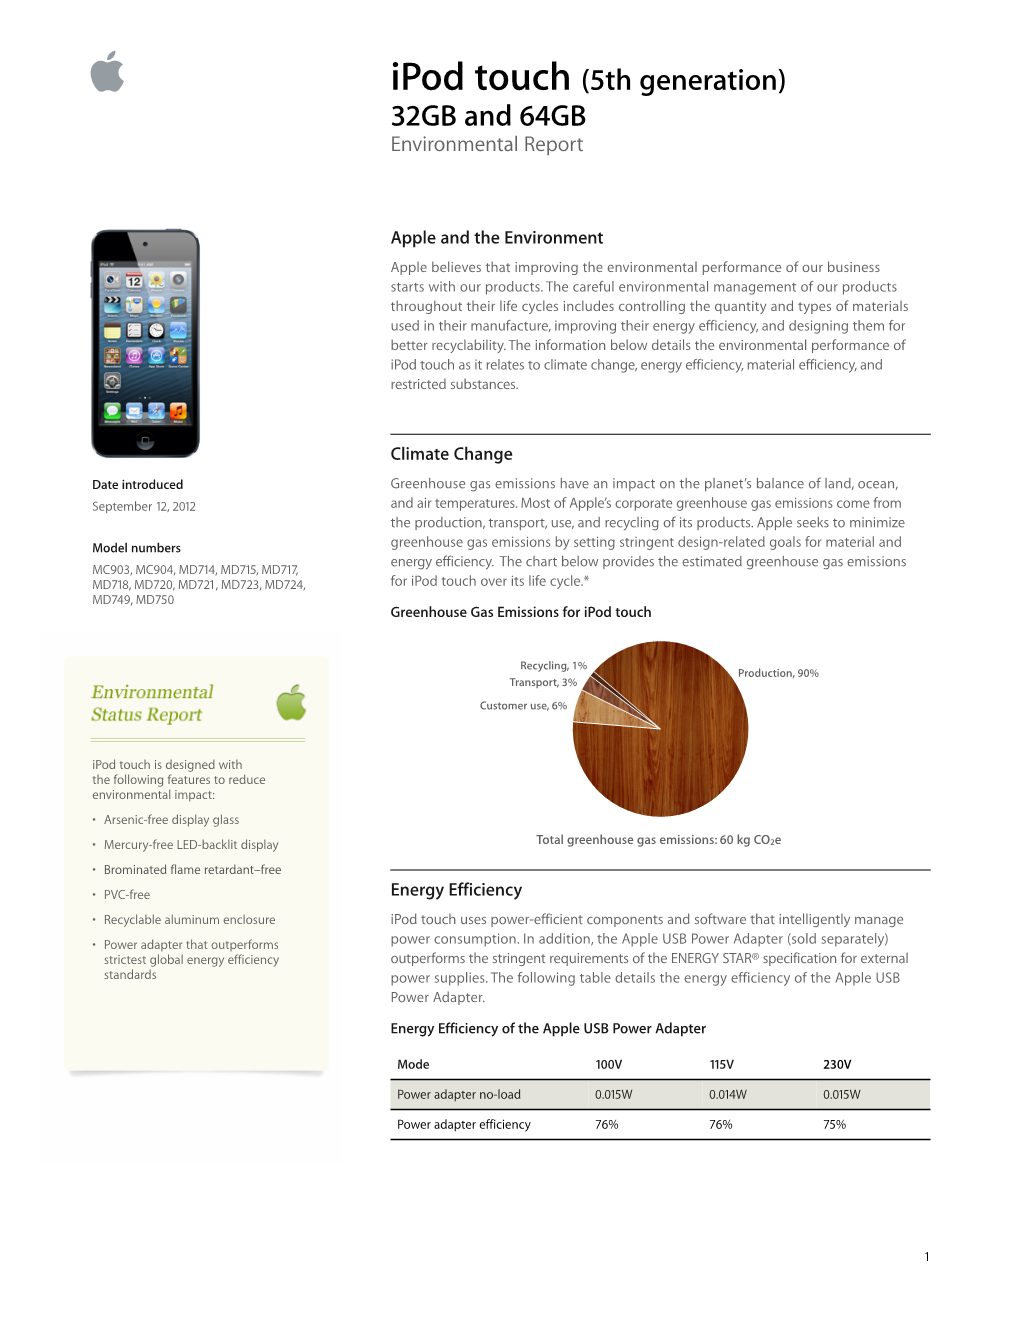 Ipod Touch (5Th Generation) 32GB and 64GB Environmental Report